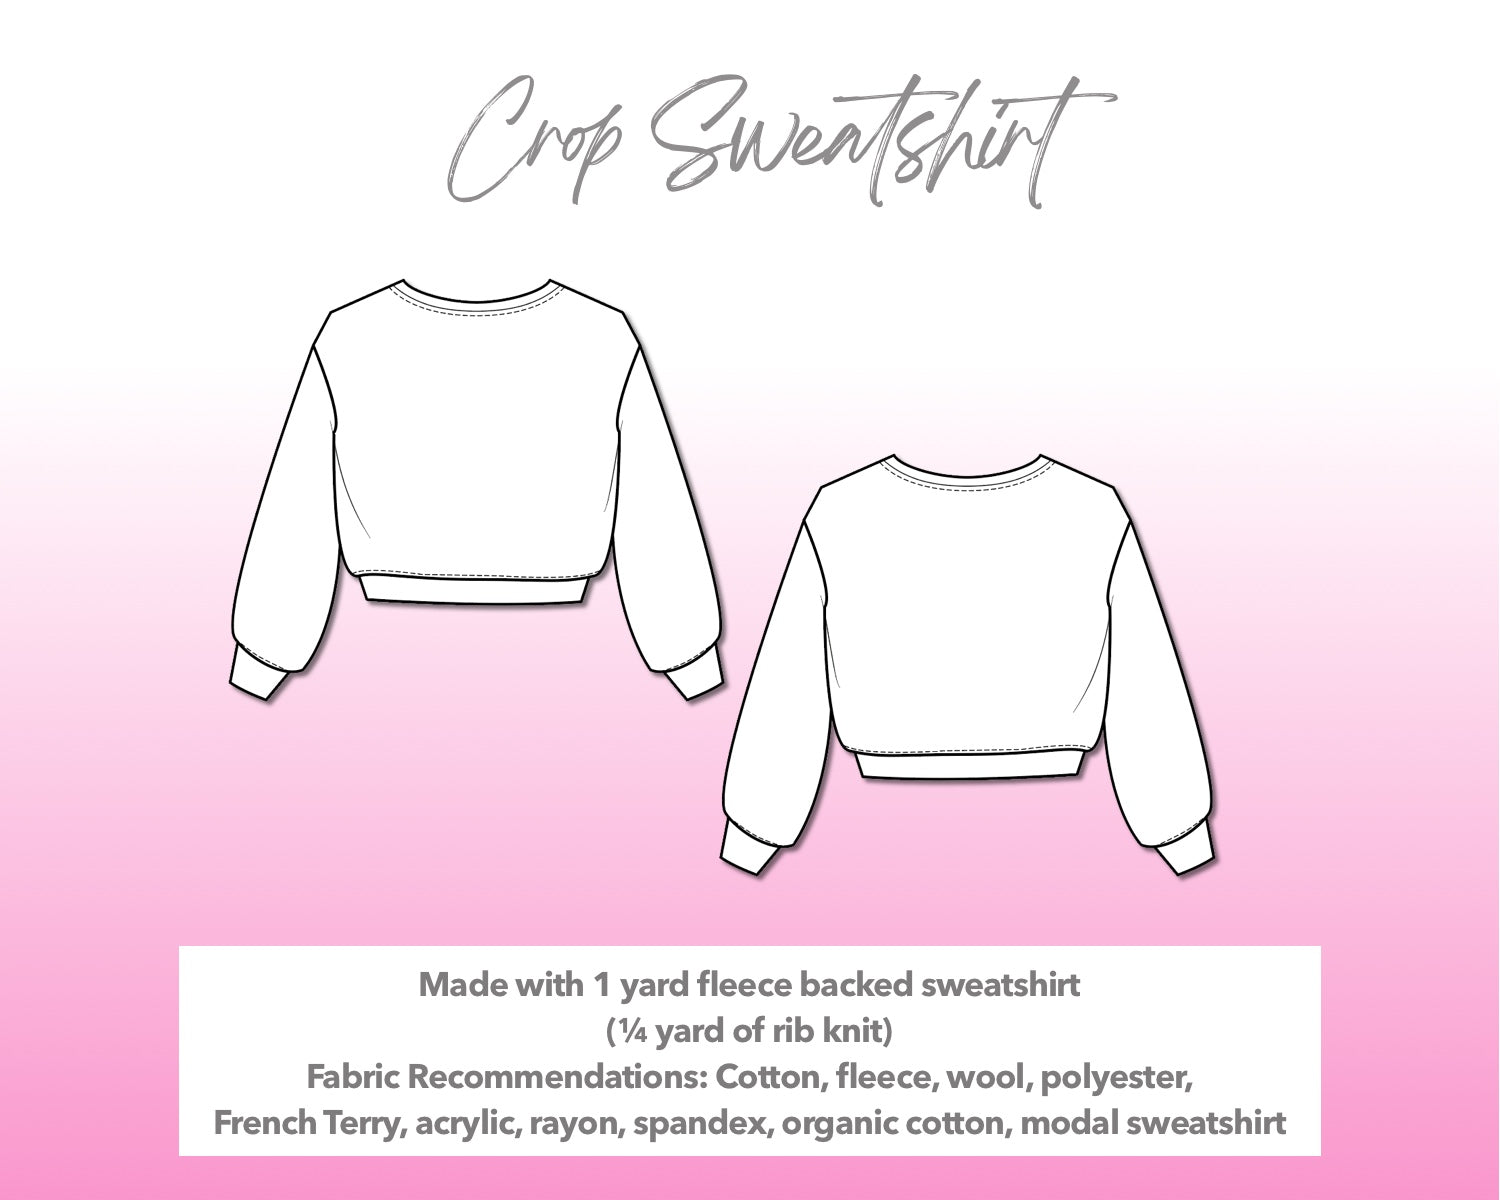 Illustration and detailed description for Crop Sweatshirt sewing pattern.